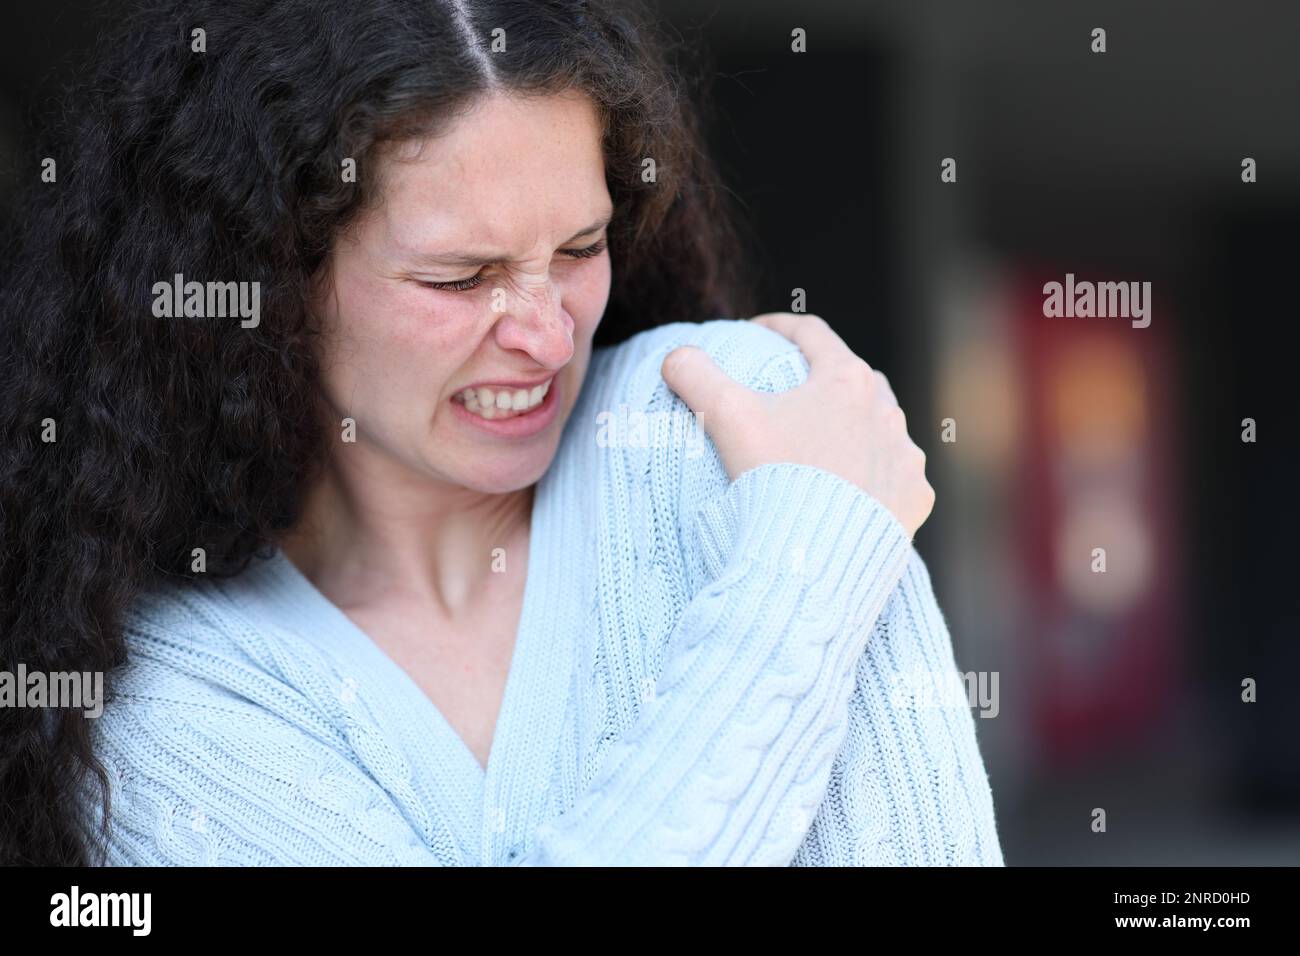 Woman suffering shoulder ache complaining in the street Stock Photo